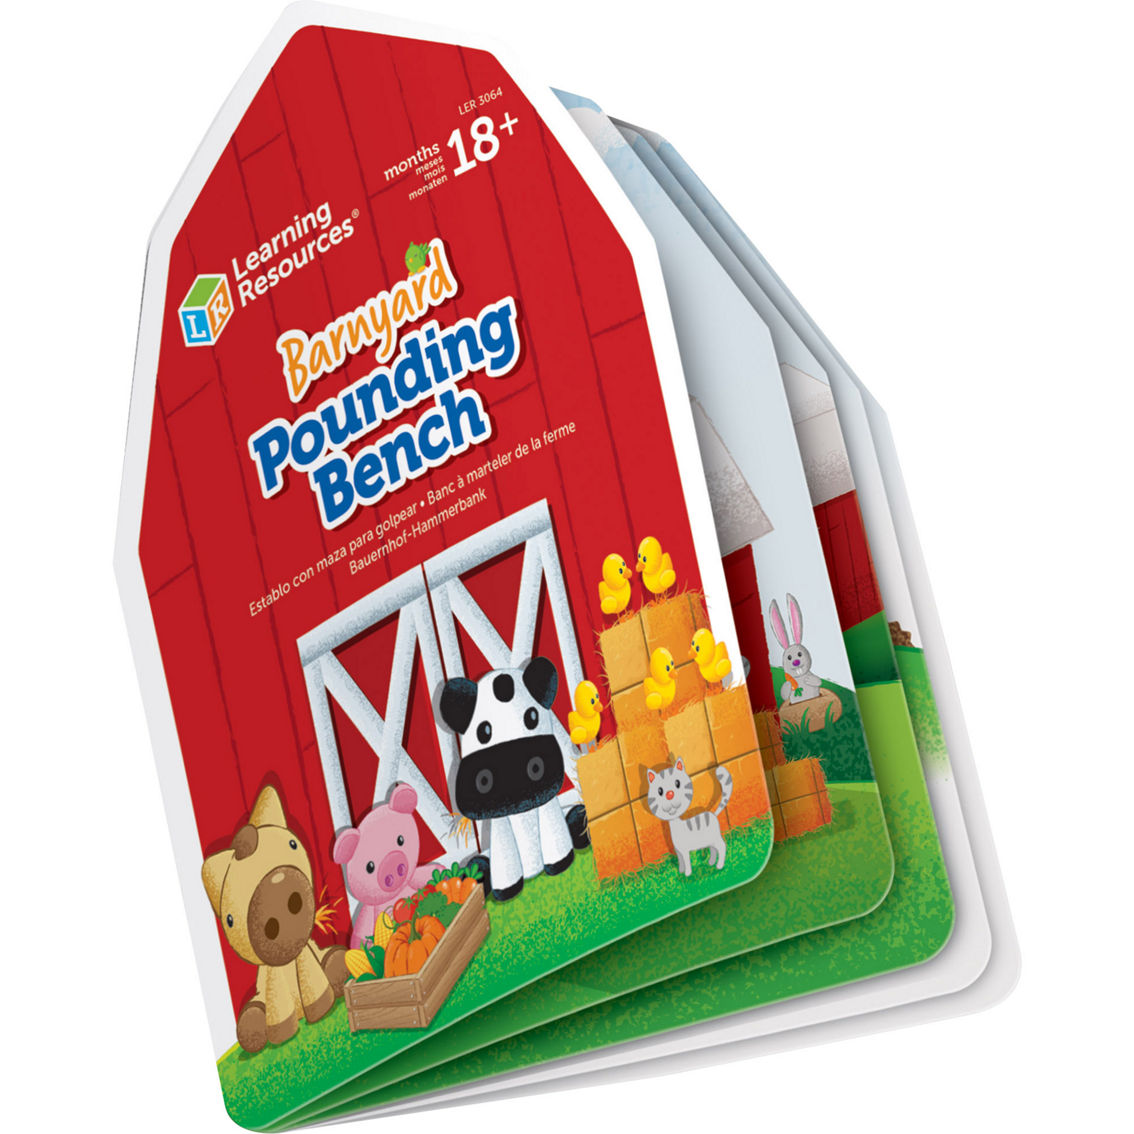 Learning Resources Barnyard Pounding Bench Toy - Image 2 of 4